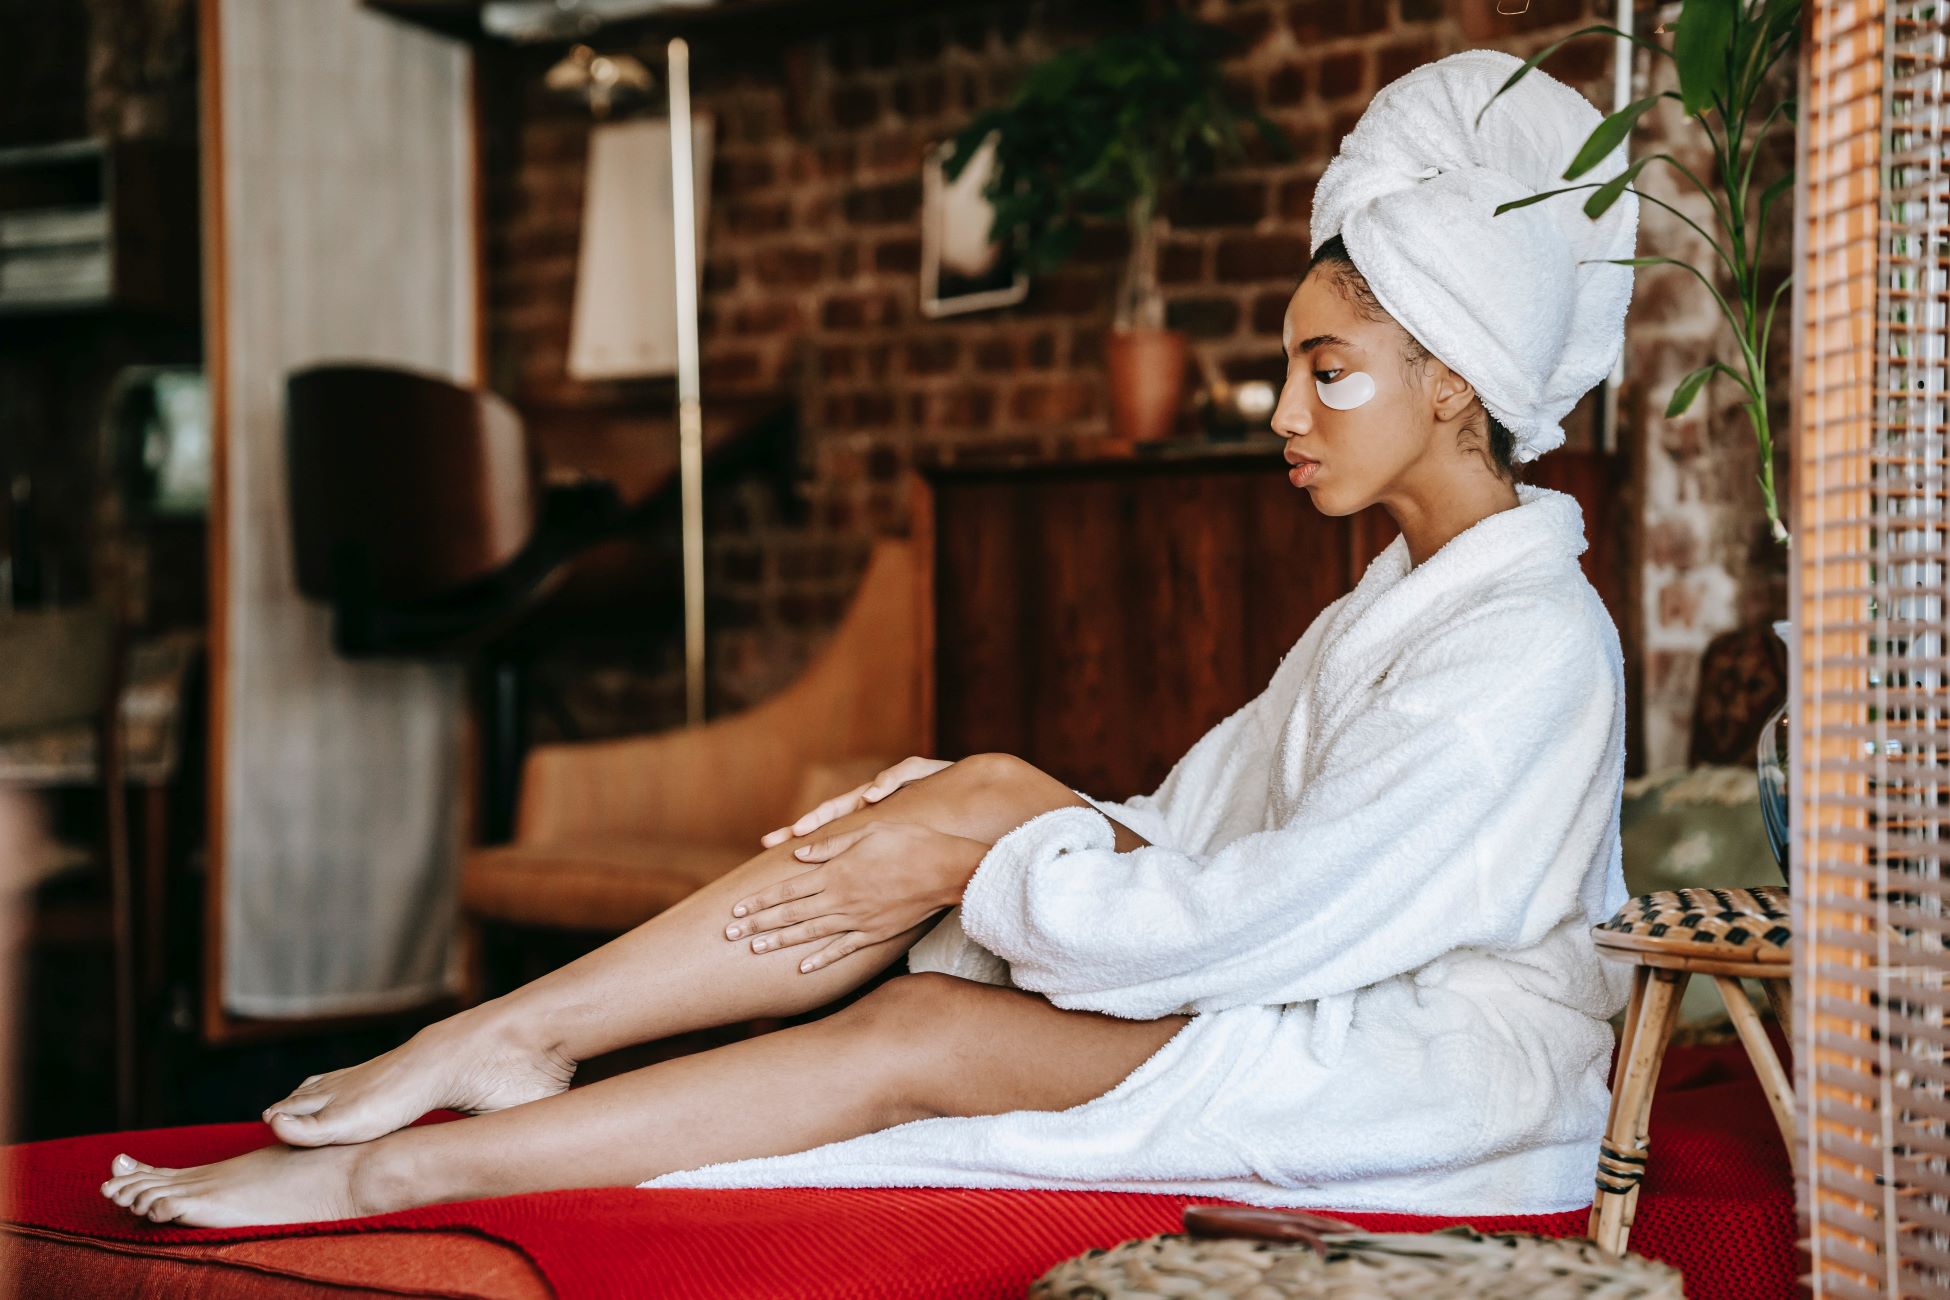 An image of a woman relaxing at a spa for her bachelorette party.